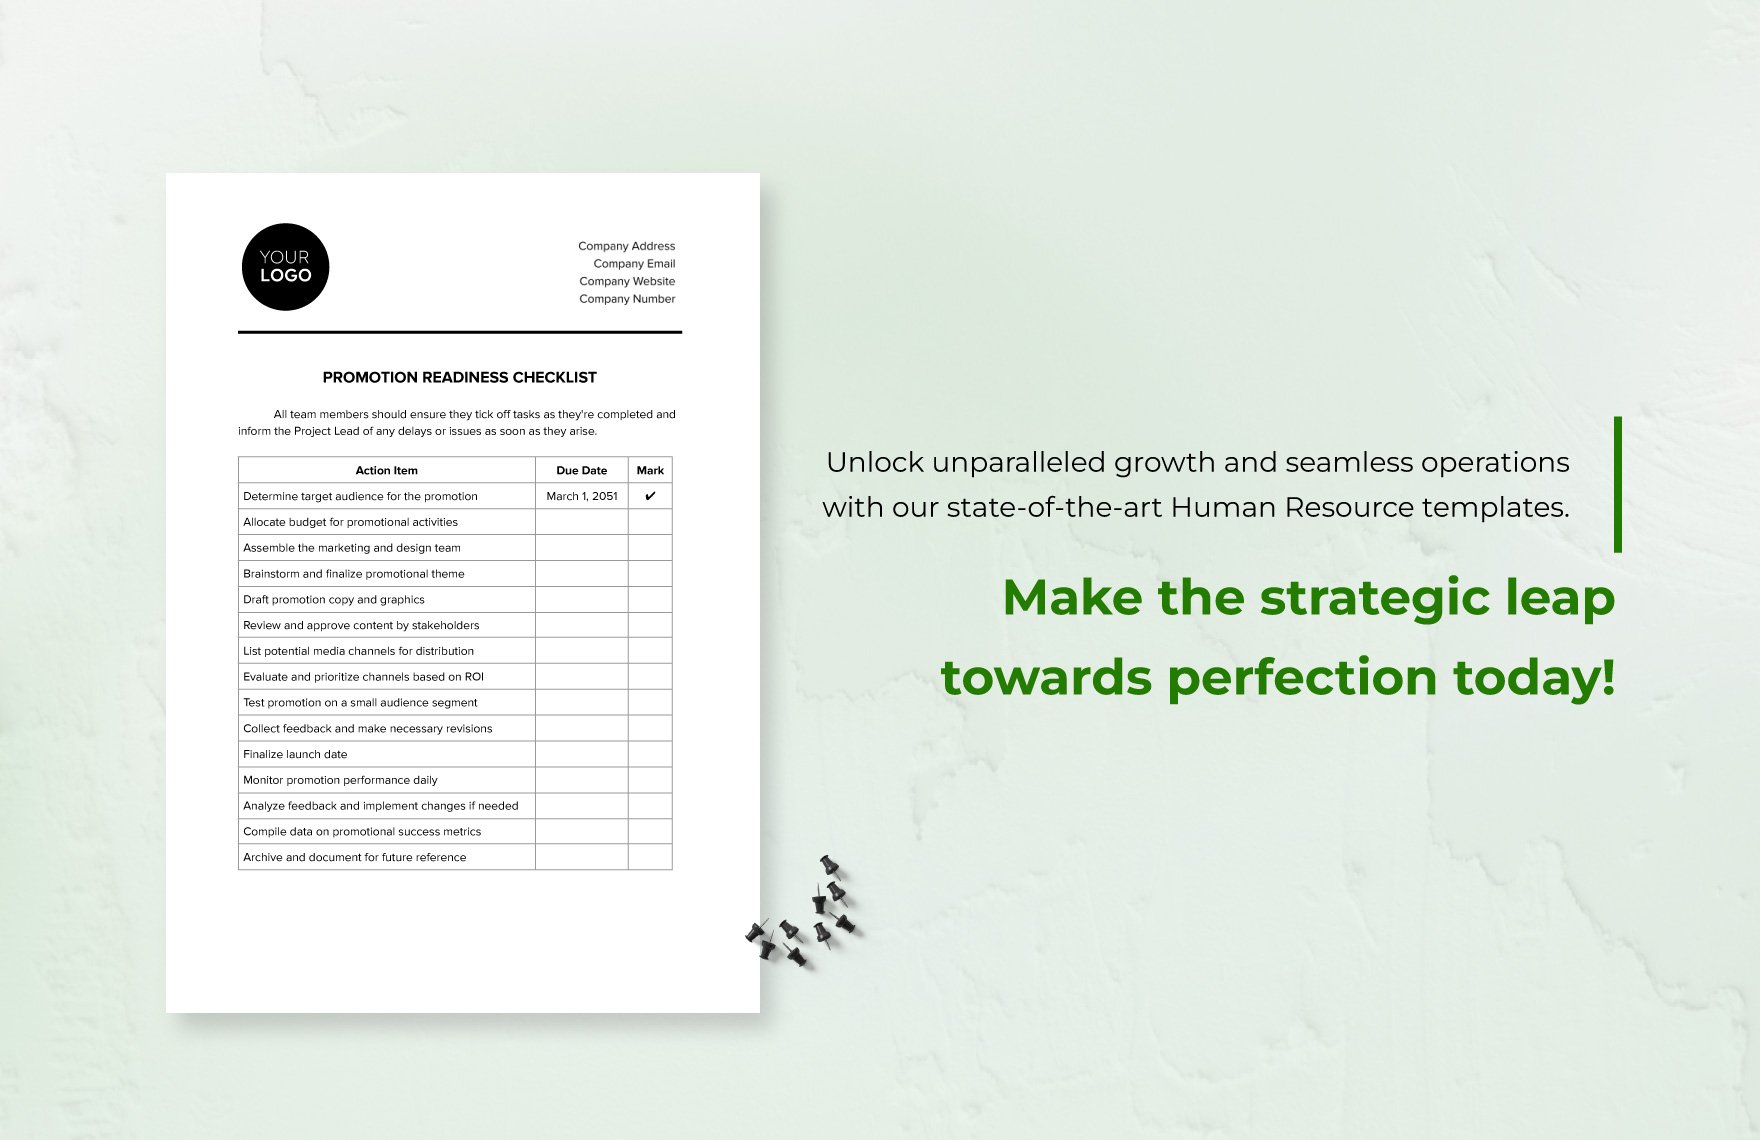 Promotion Readiness Checklist HR Template